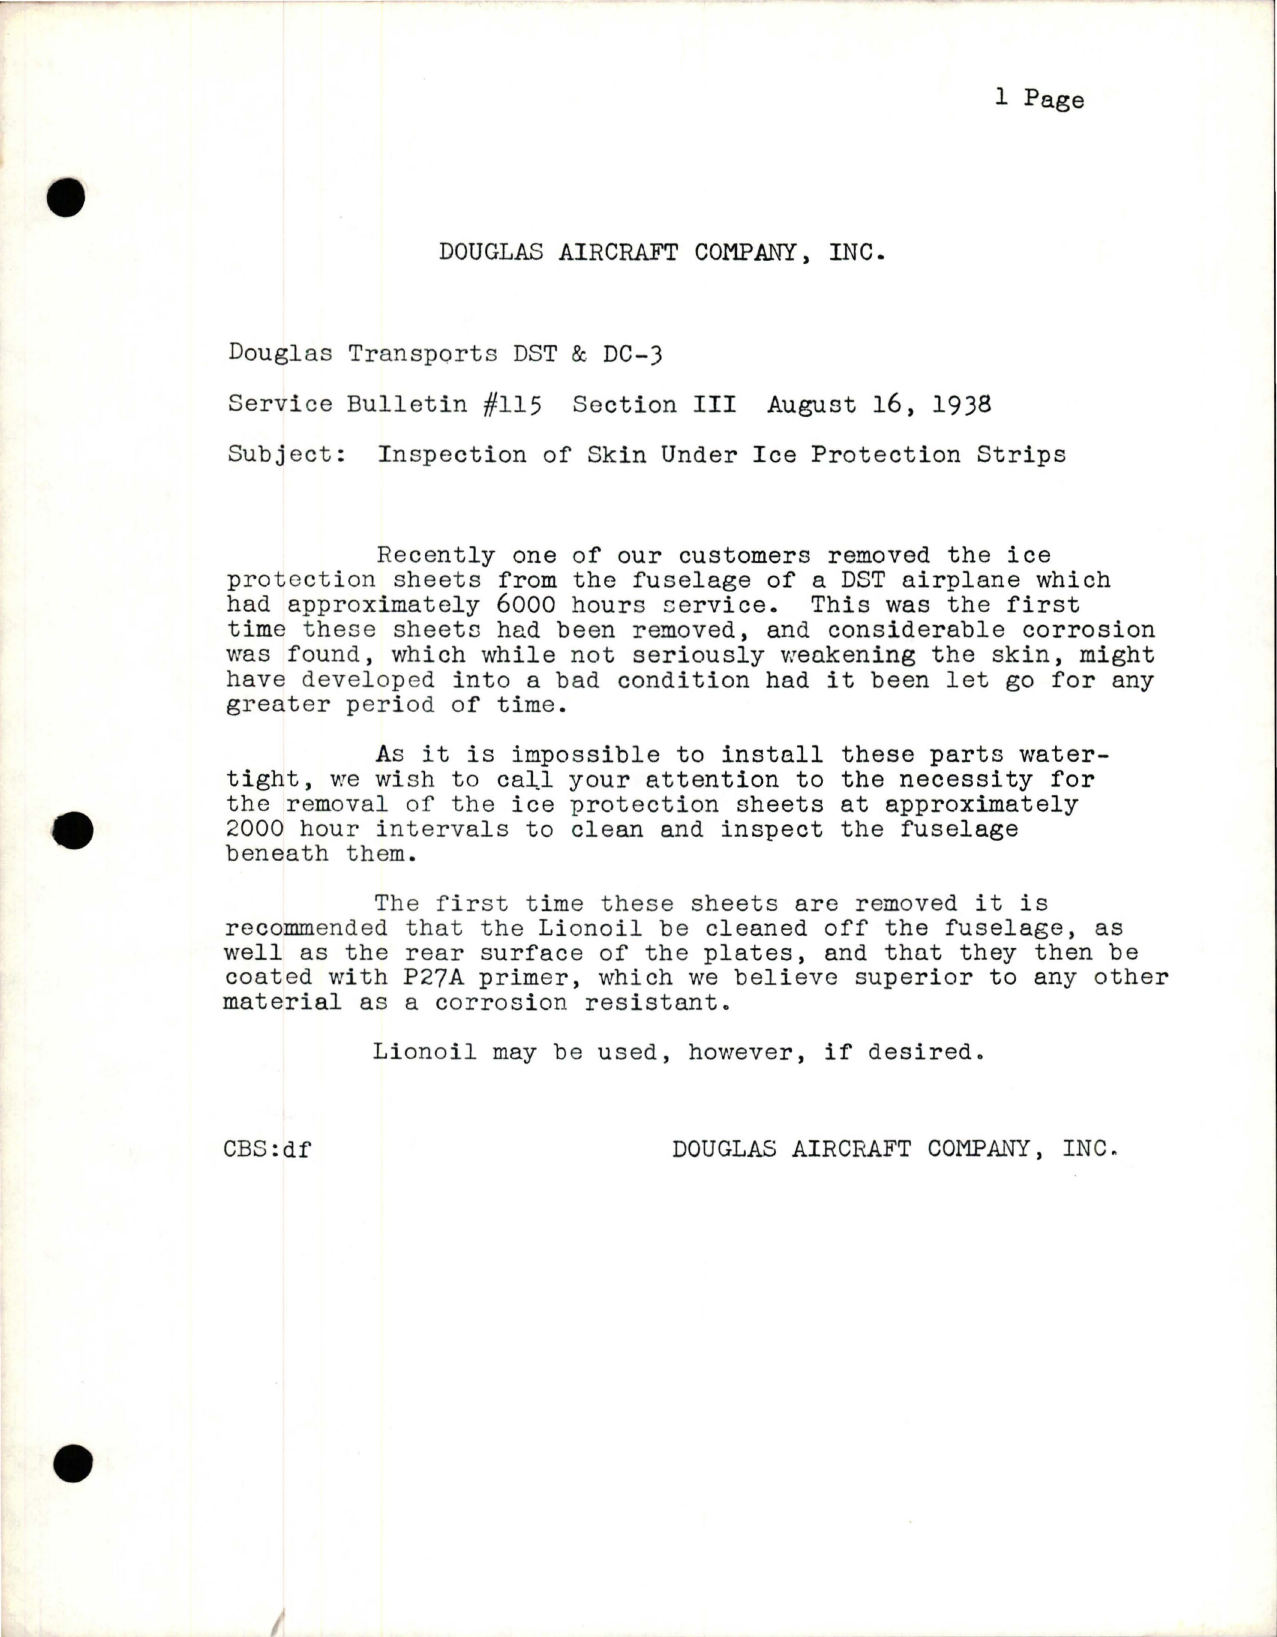 Sample page 1 from AirCorps Library document: Inspection of Skin Under Ice Protection Strips